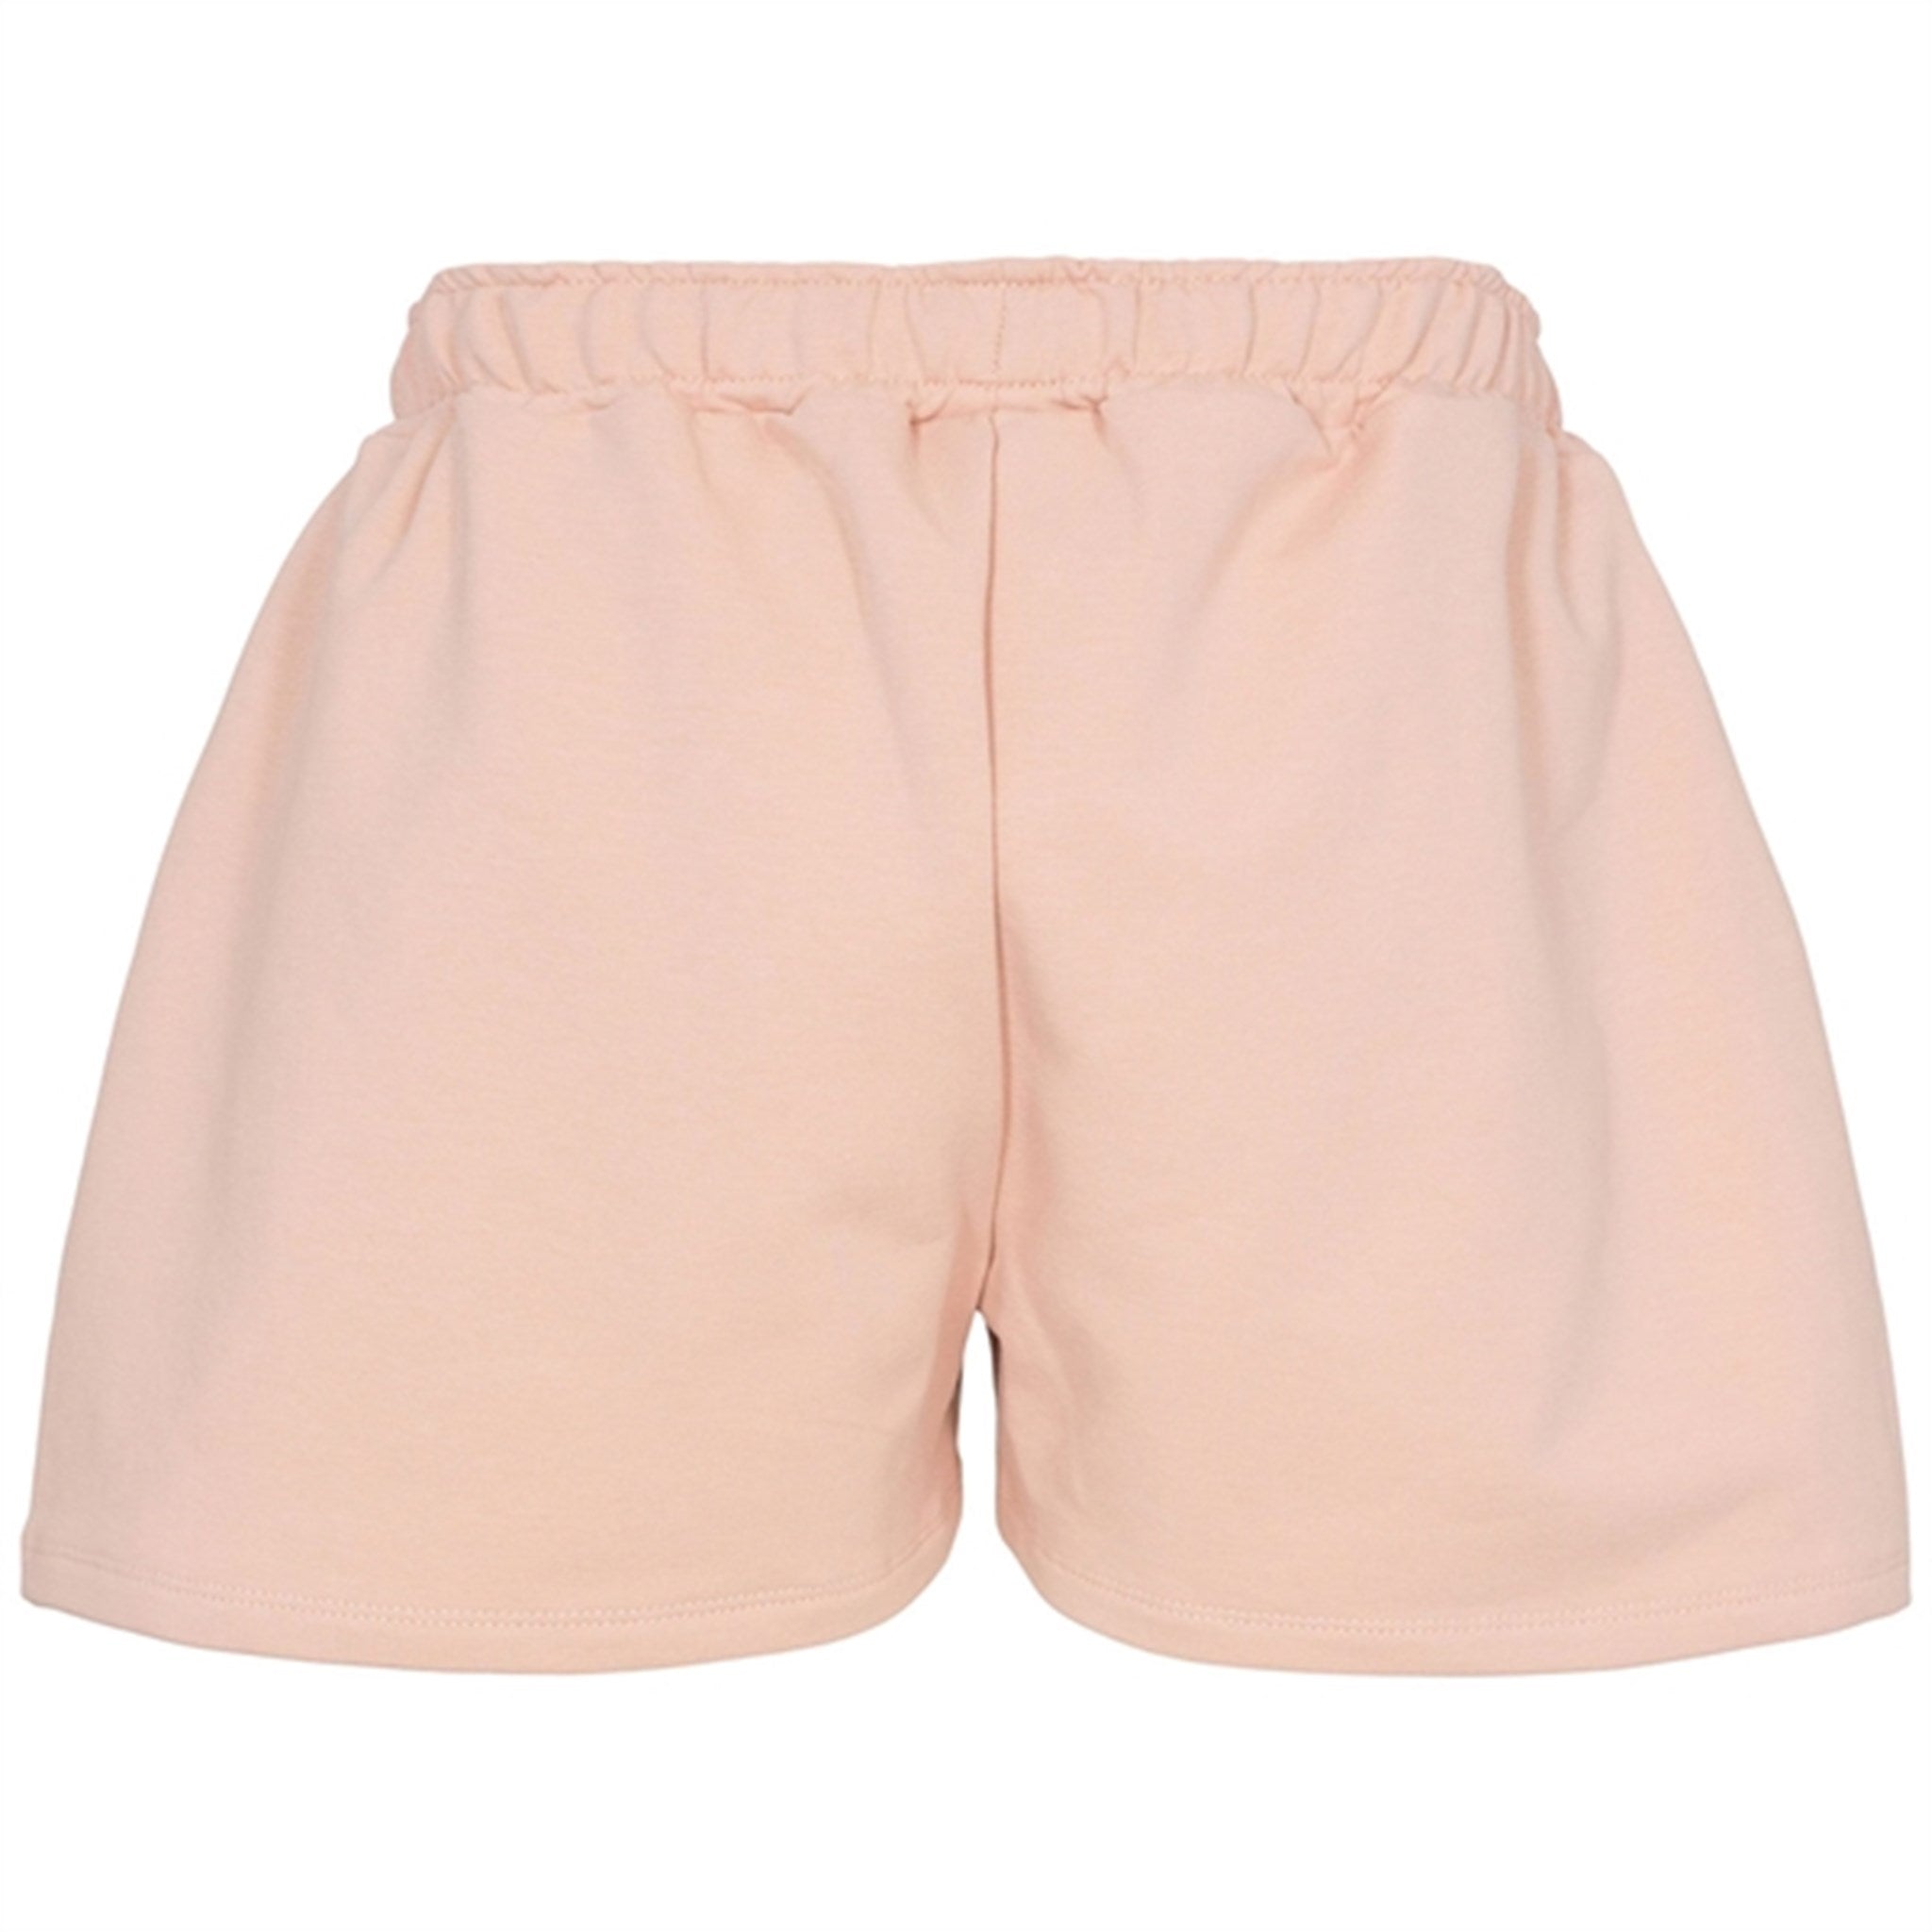 Sofie Schnoor Young Light Rose Shorts 2